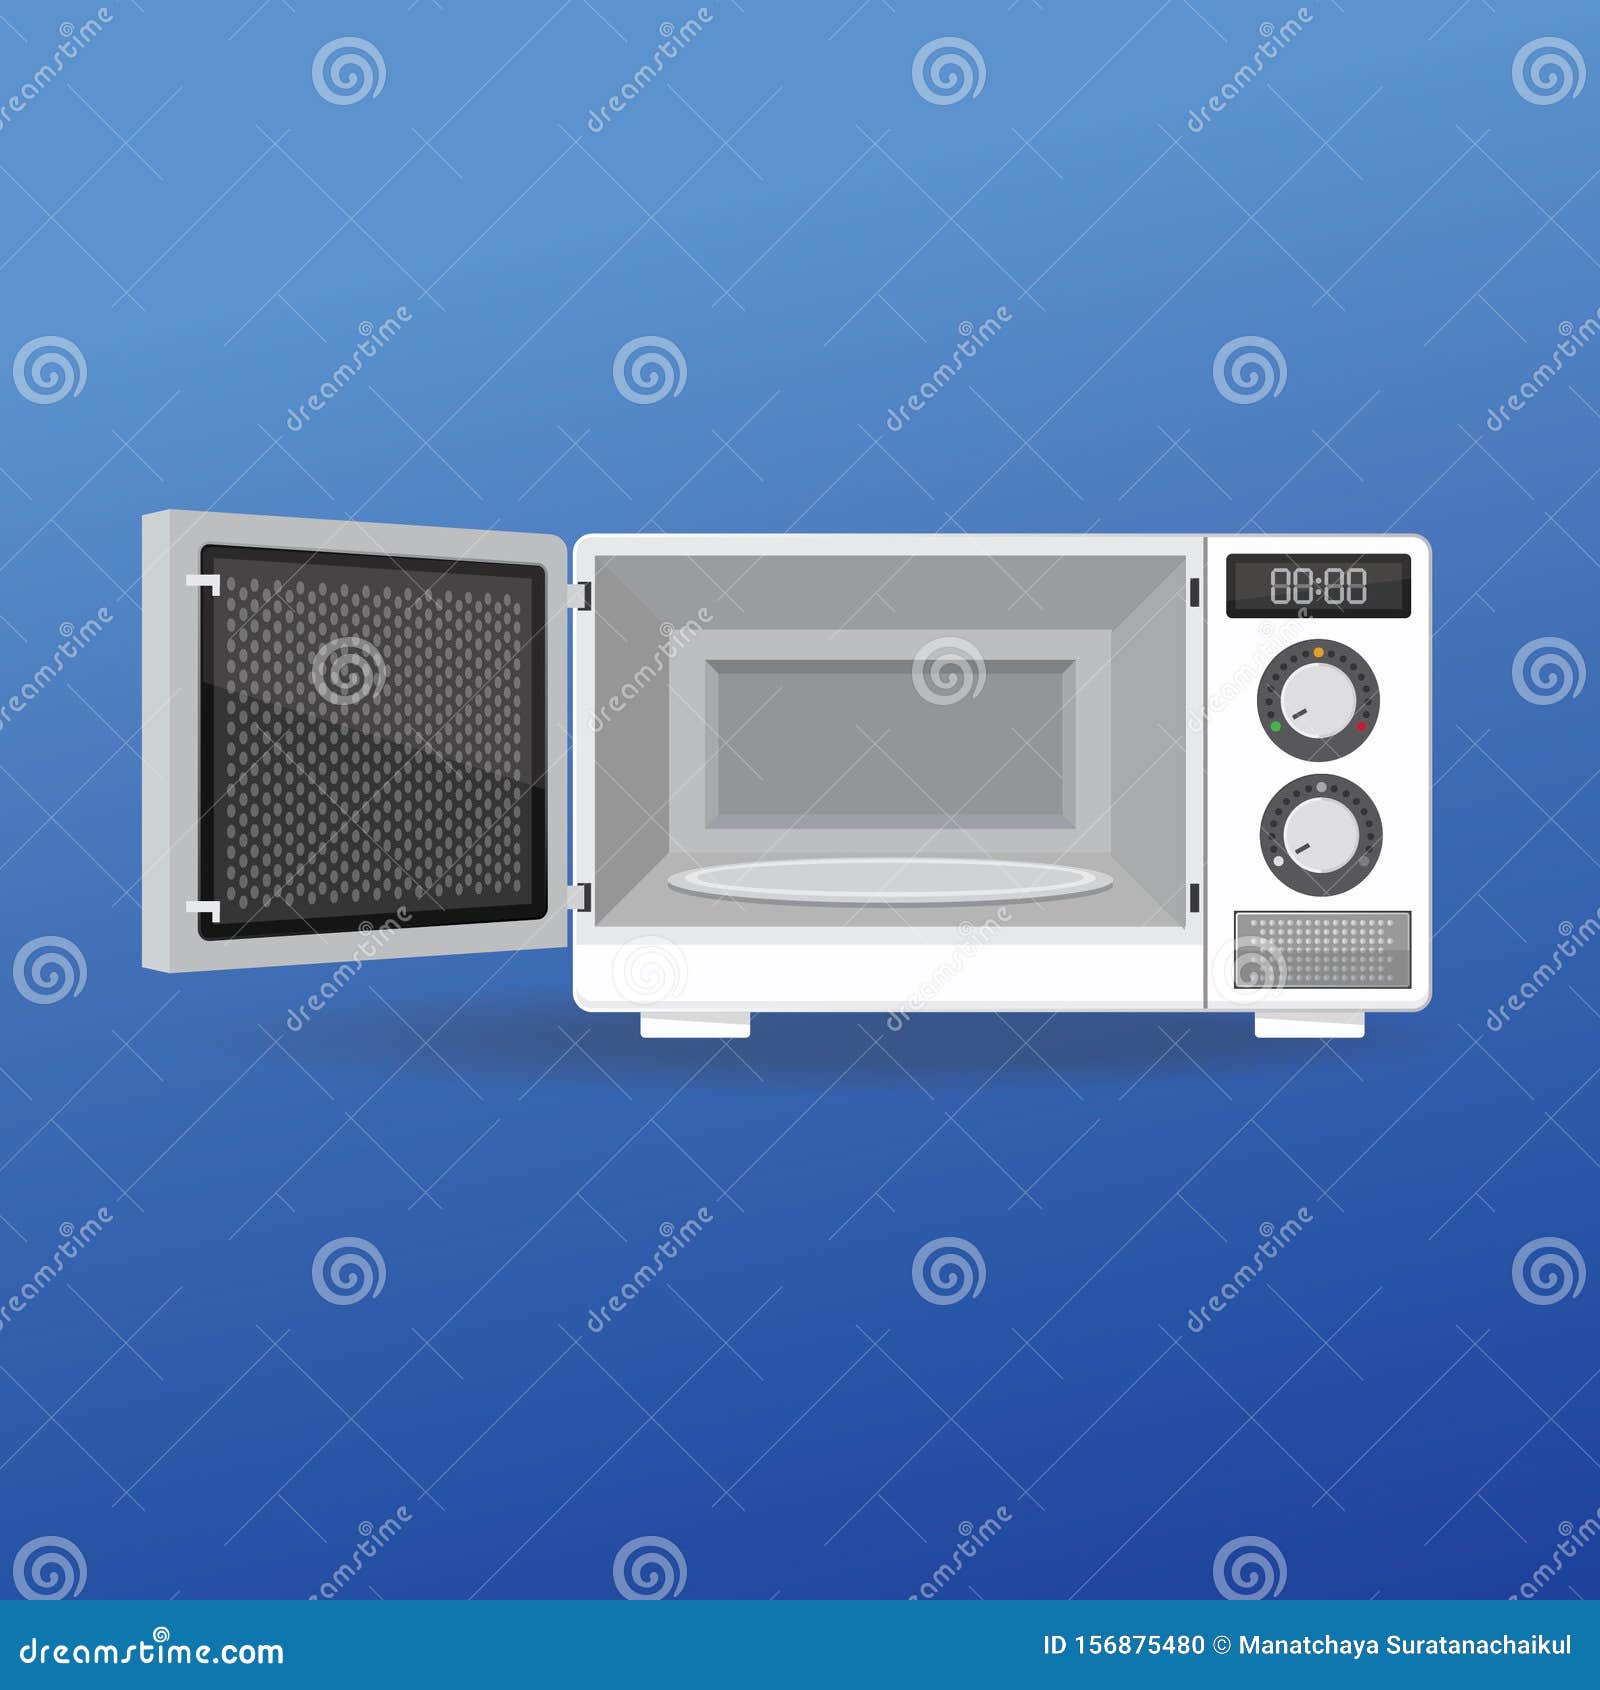 Microwave Oven With Open Door. Stock Illustration - Illustration of